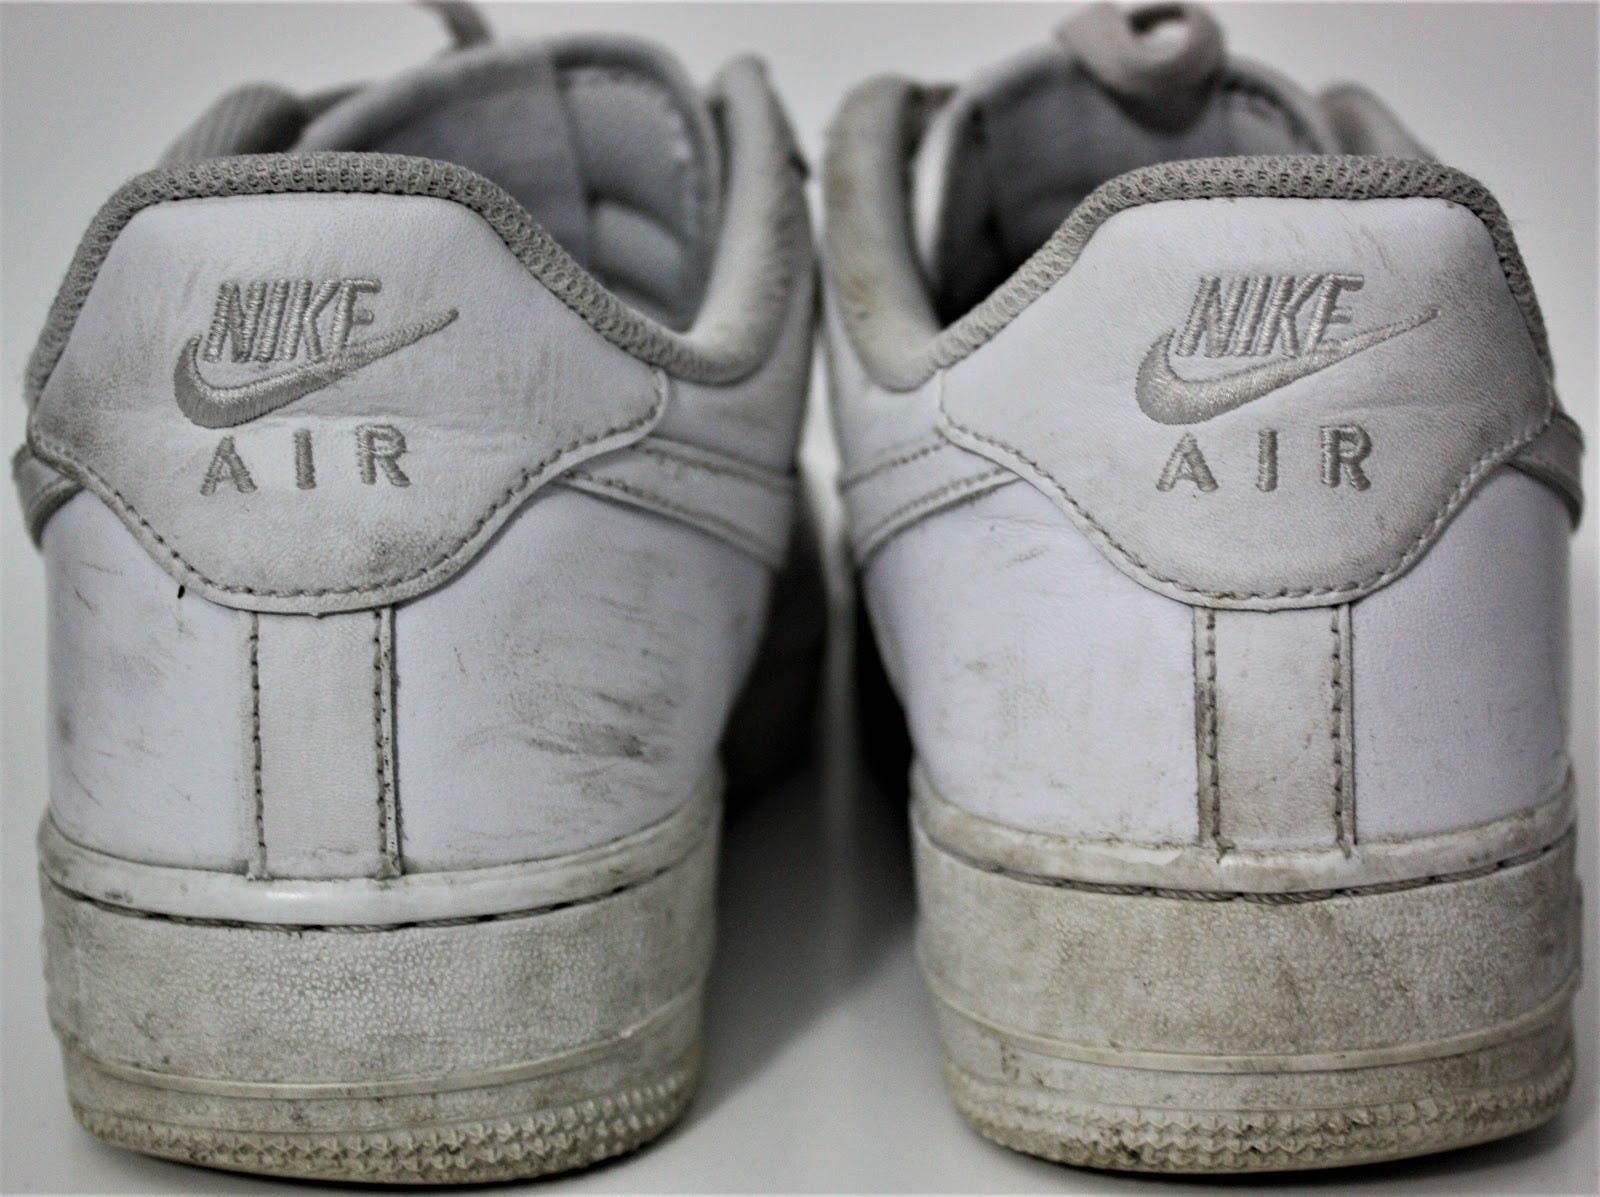 My pair of Nike Air Force 1. The 